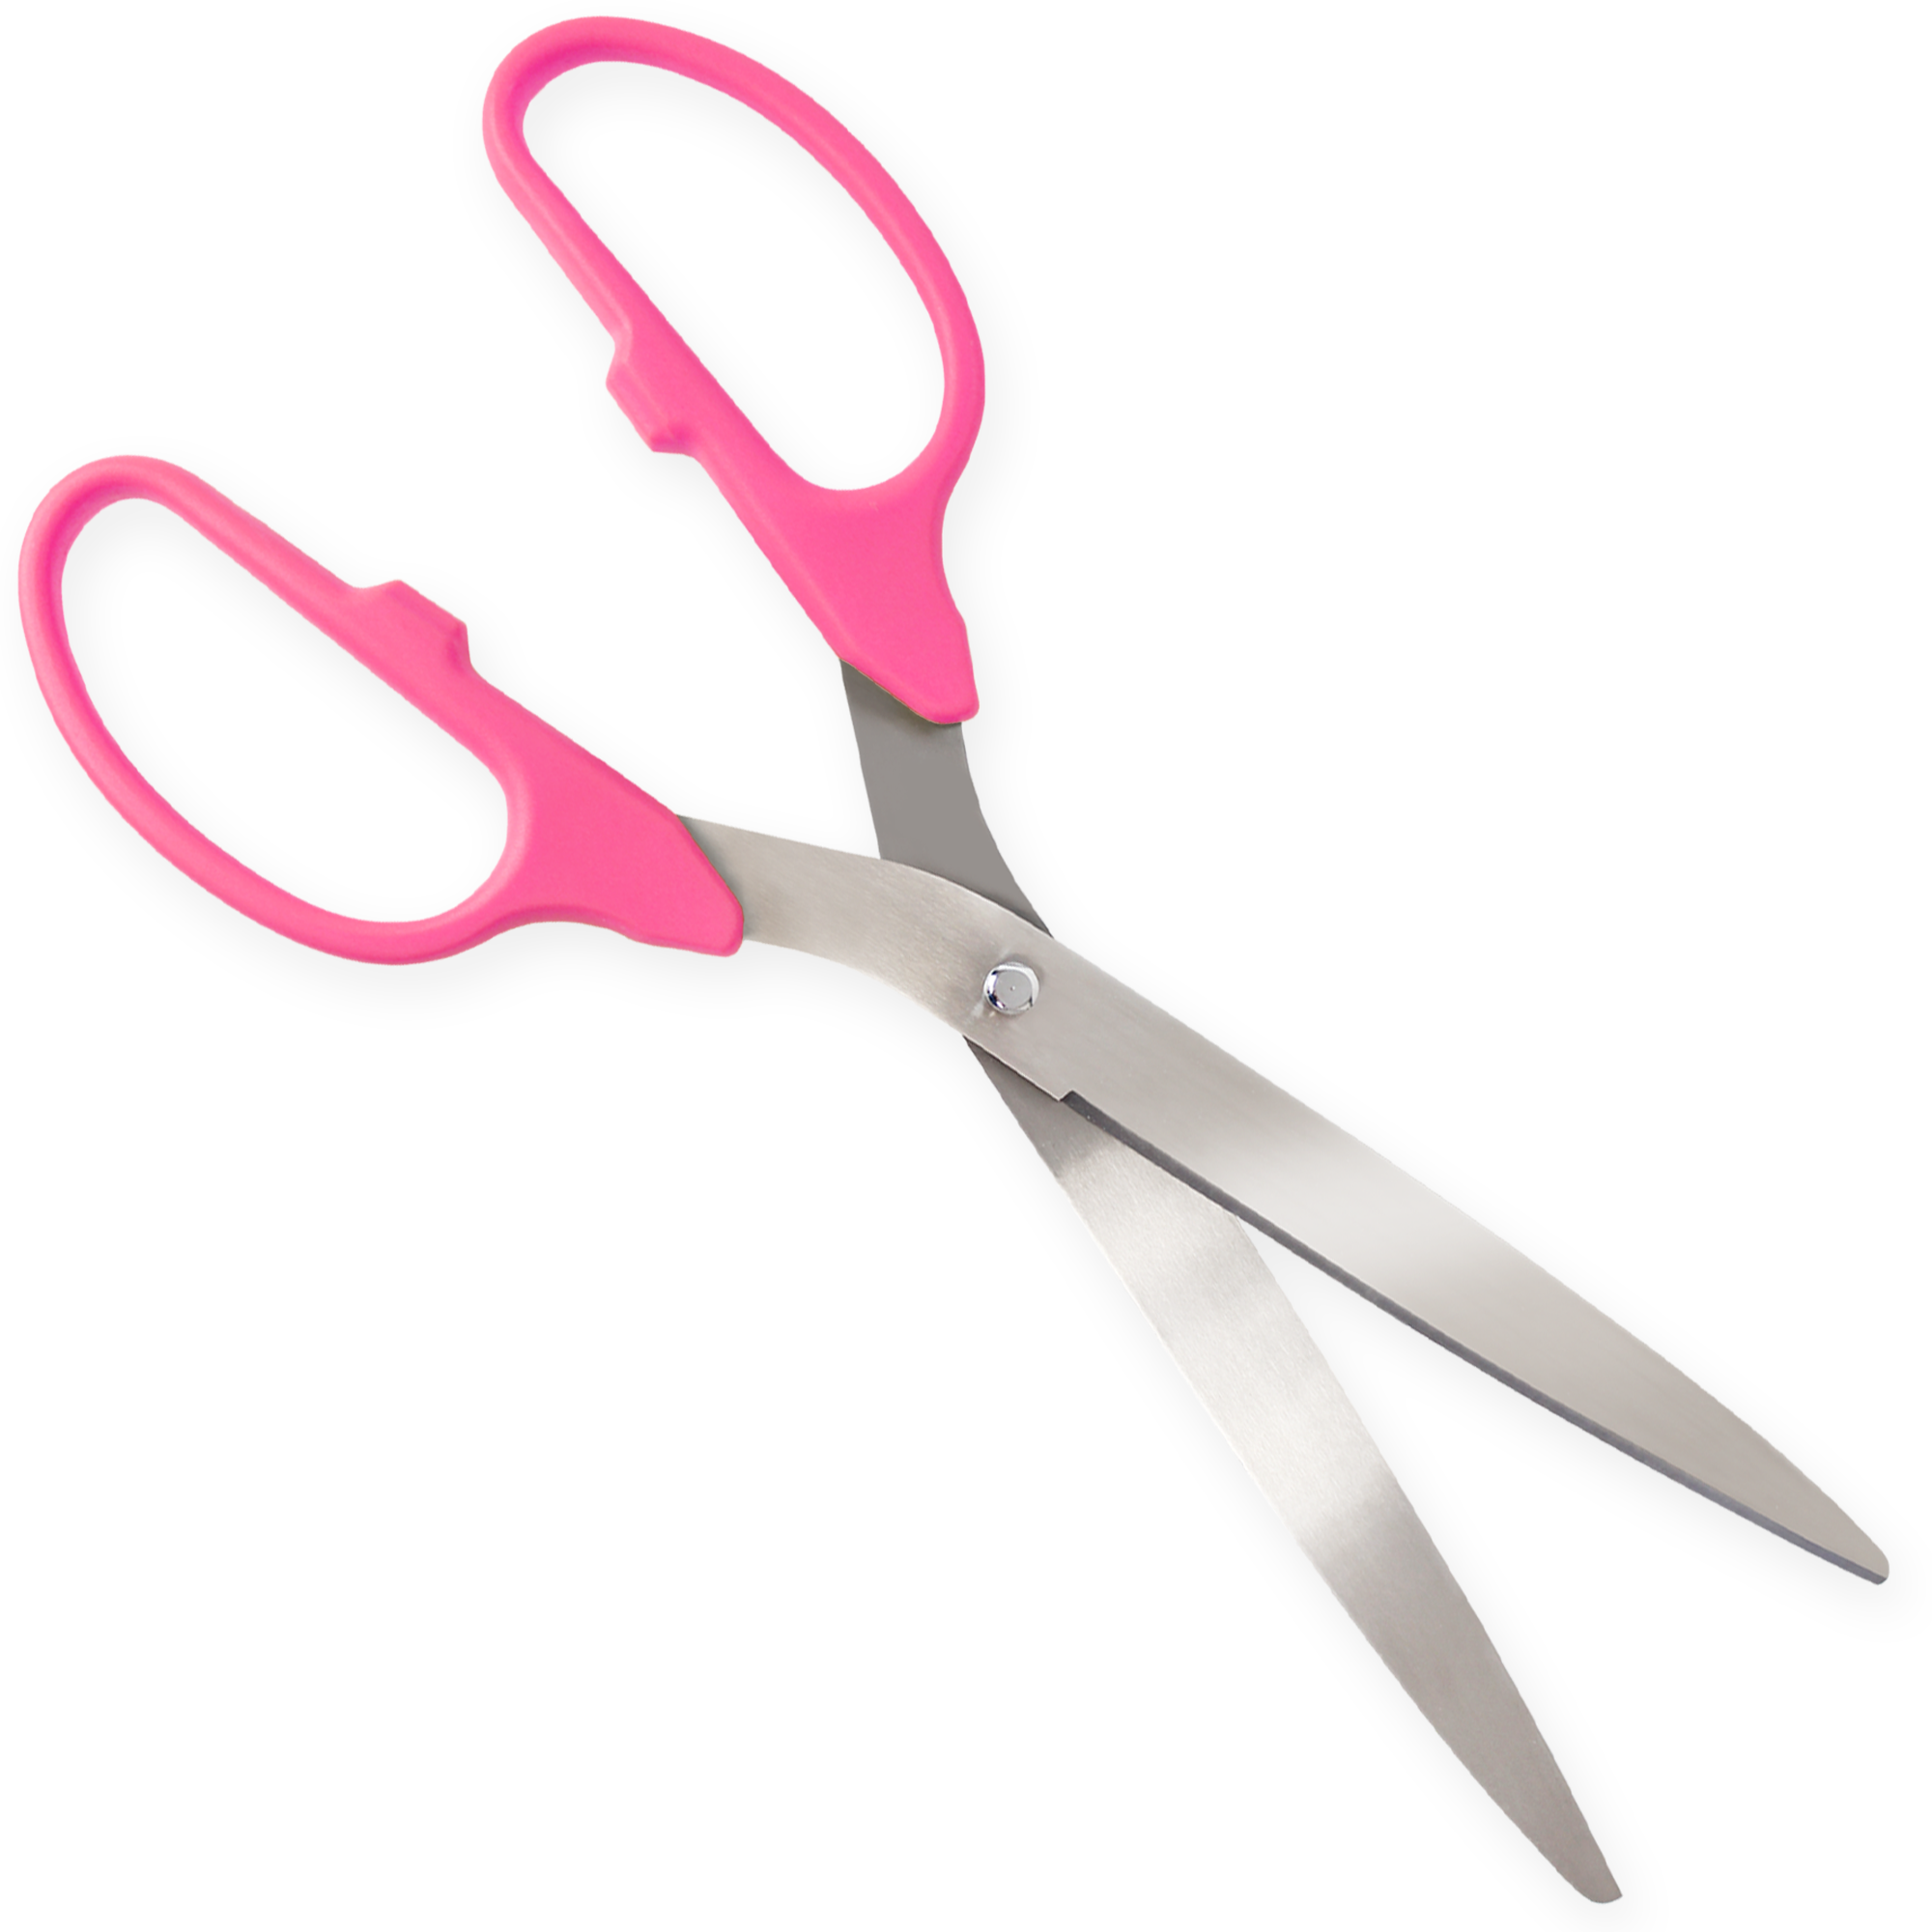 36 Pink Ribbon Cutting Scissors with Silver Blades